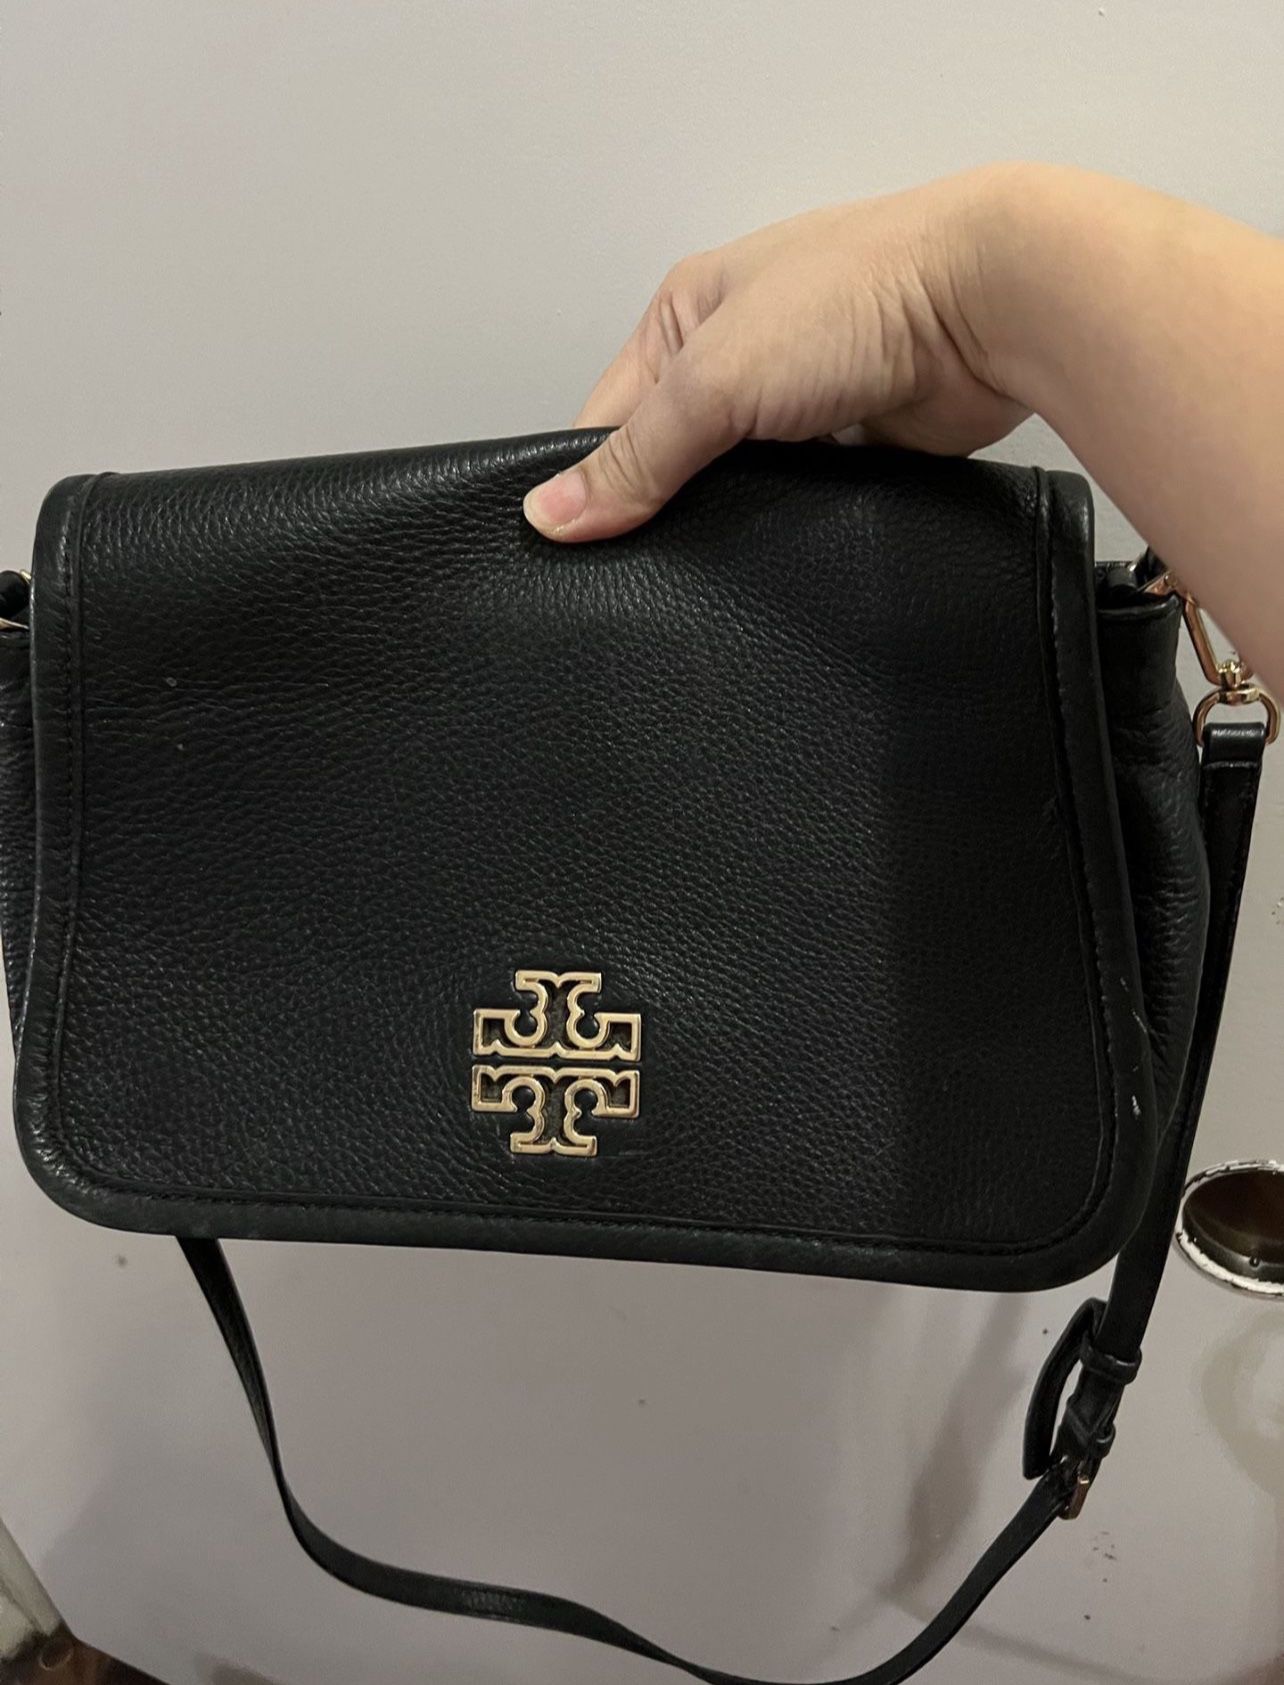 Tory Burch Bag for Sale in San Diego, CA - OfferUp